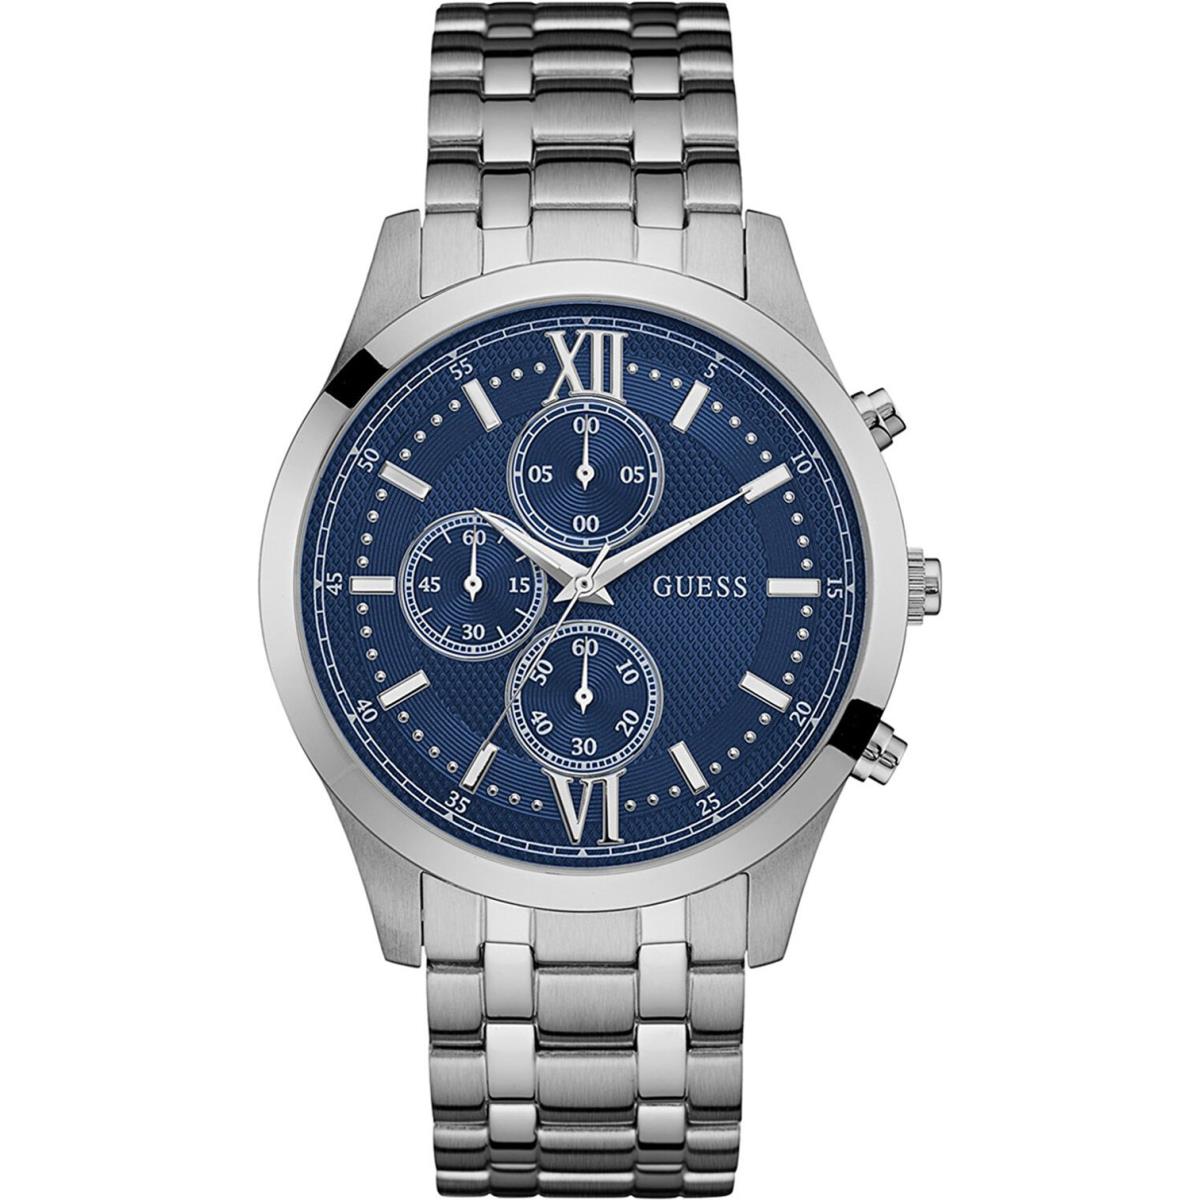 Guess W0875G1 Men`s Chronograph Blue Dial Stainless Steel Case Bracelet 50m WR